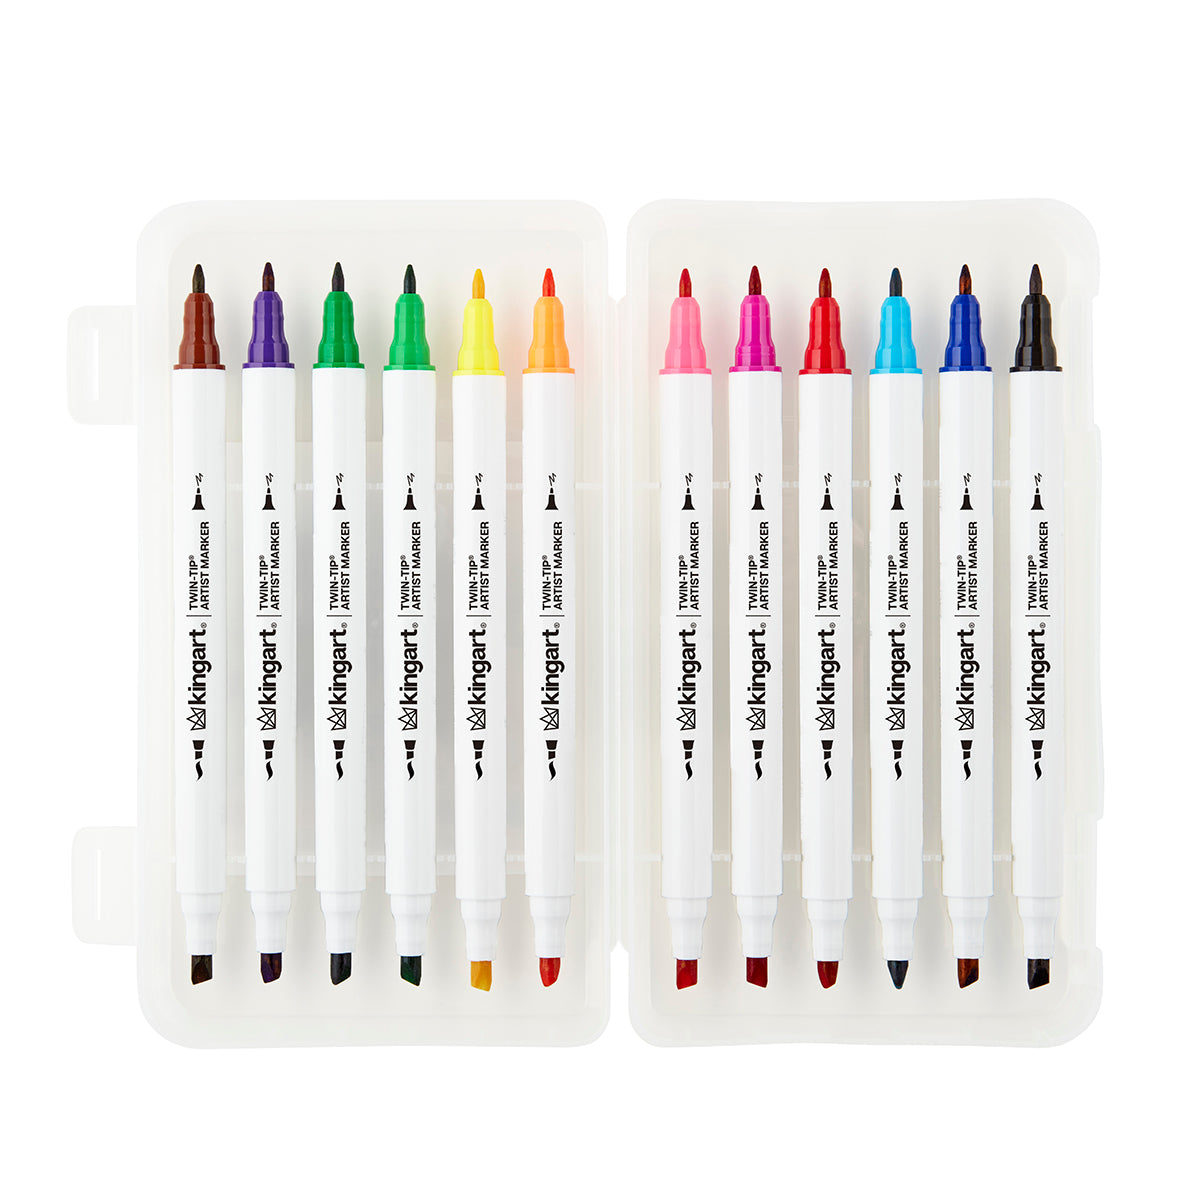 KINGART® Metallic Markers with Travel Case, Set of 6 Colors